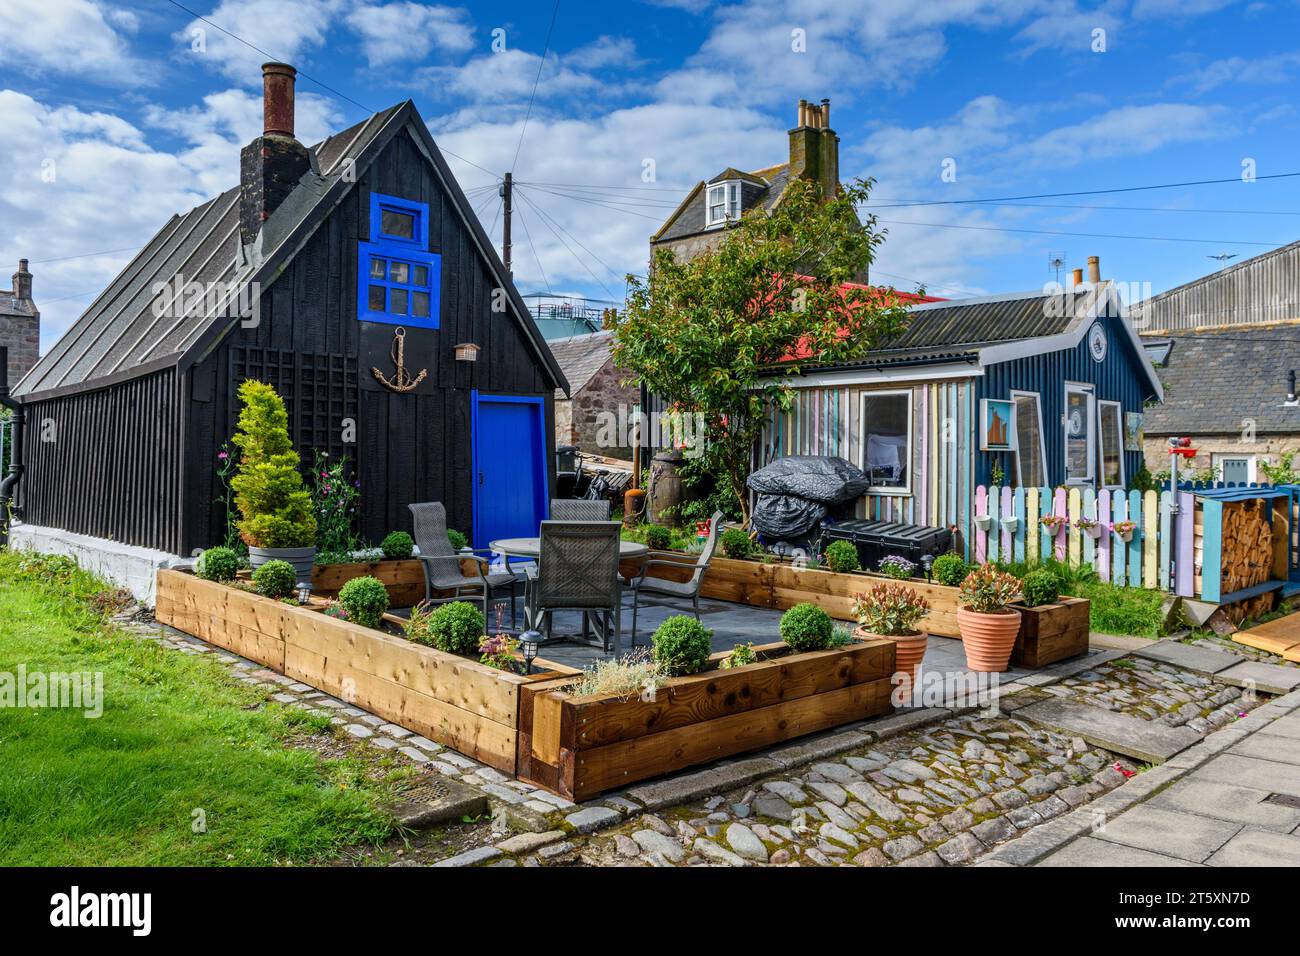 Cottages in the historic former fishing village of Footdee, The dwellings are laid out in squares with their backs to the sea.  Aberdeen, Scotland, UK Stock Photo